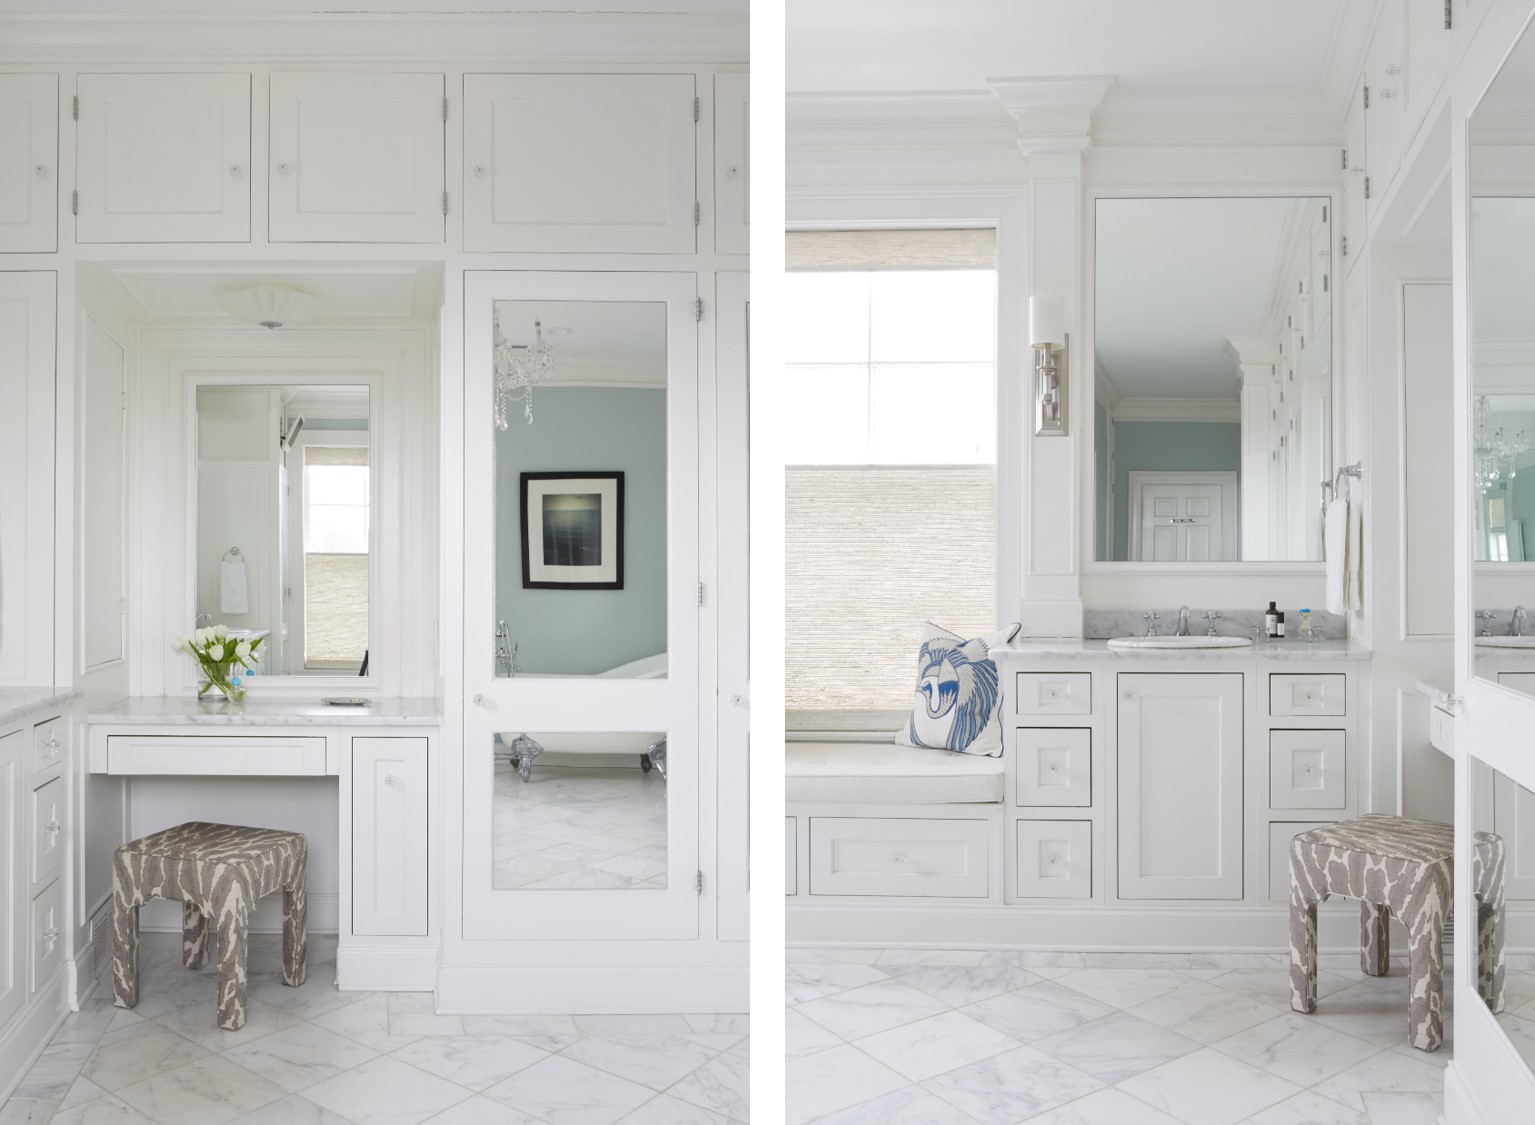 White bathroom with white marble. Lots of storage. Slick and clean